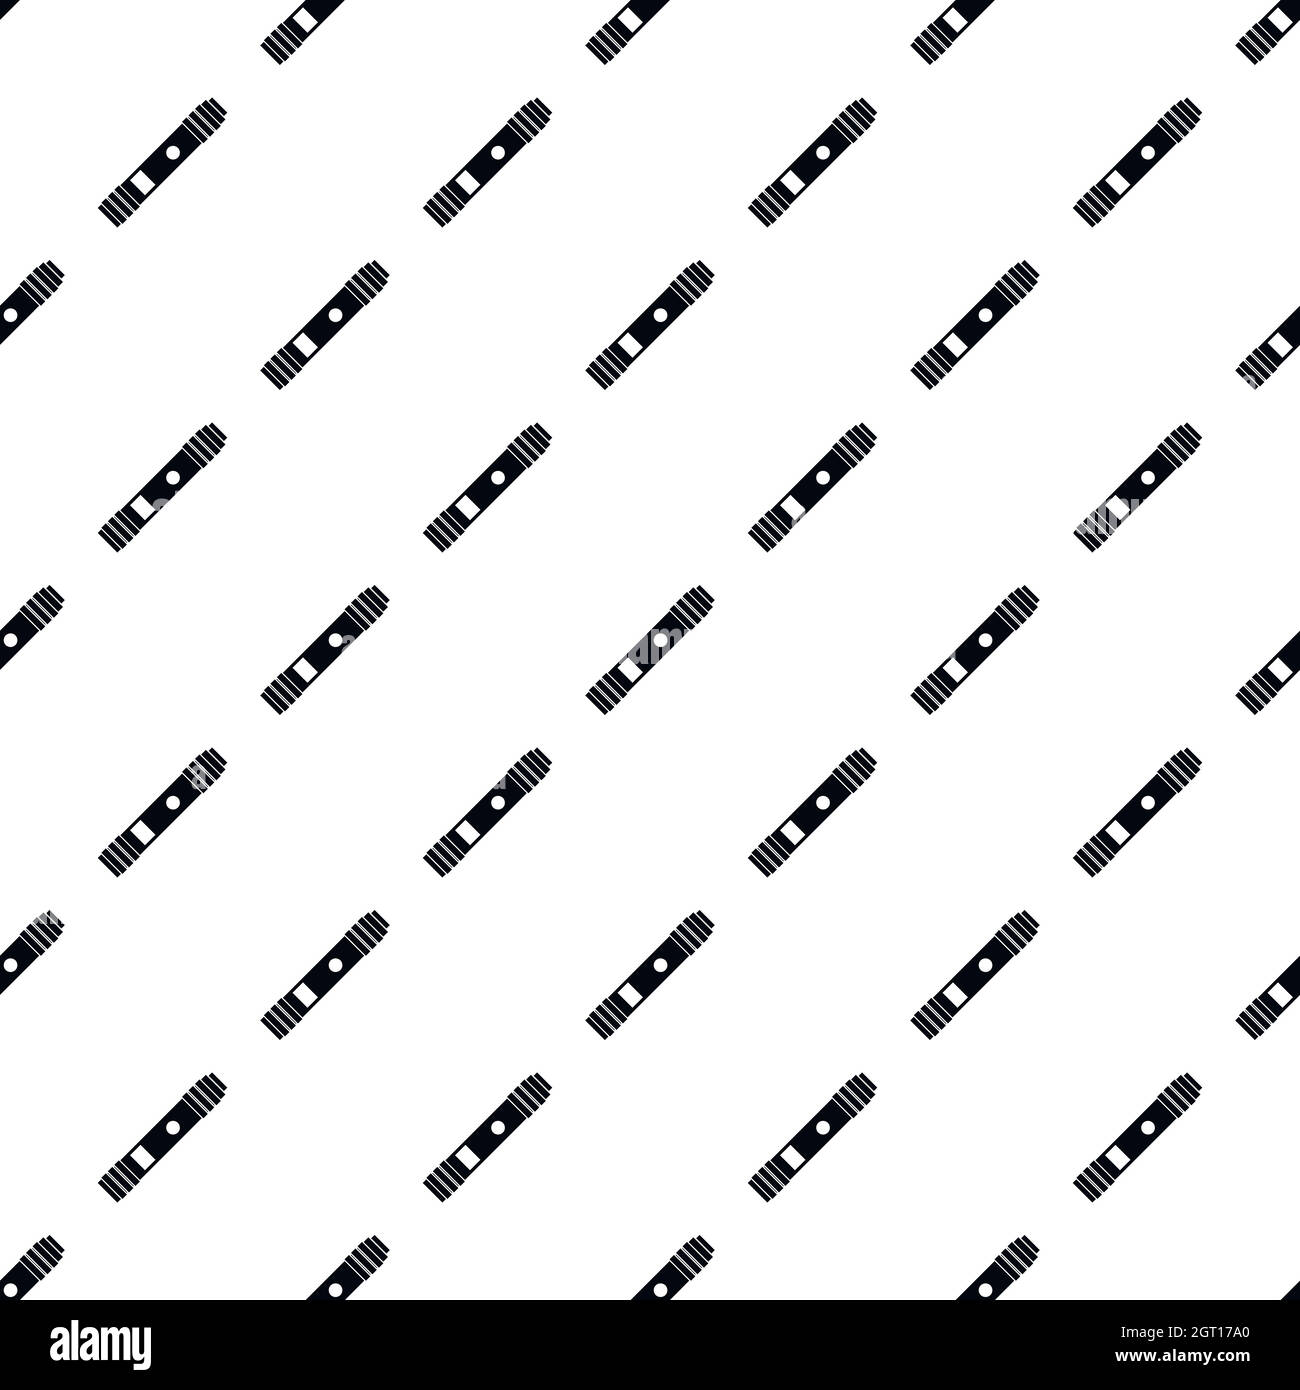 Electronic cigarette pattern, simple style Stock Vector